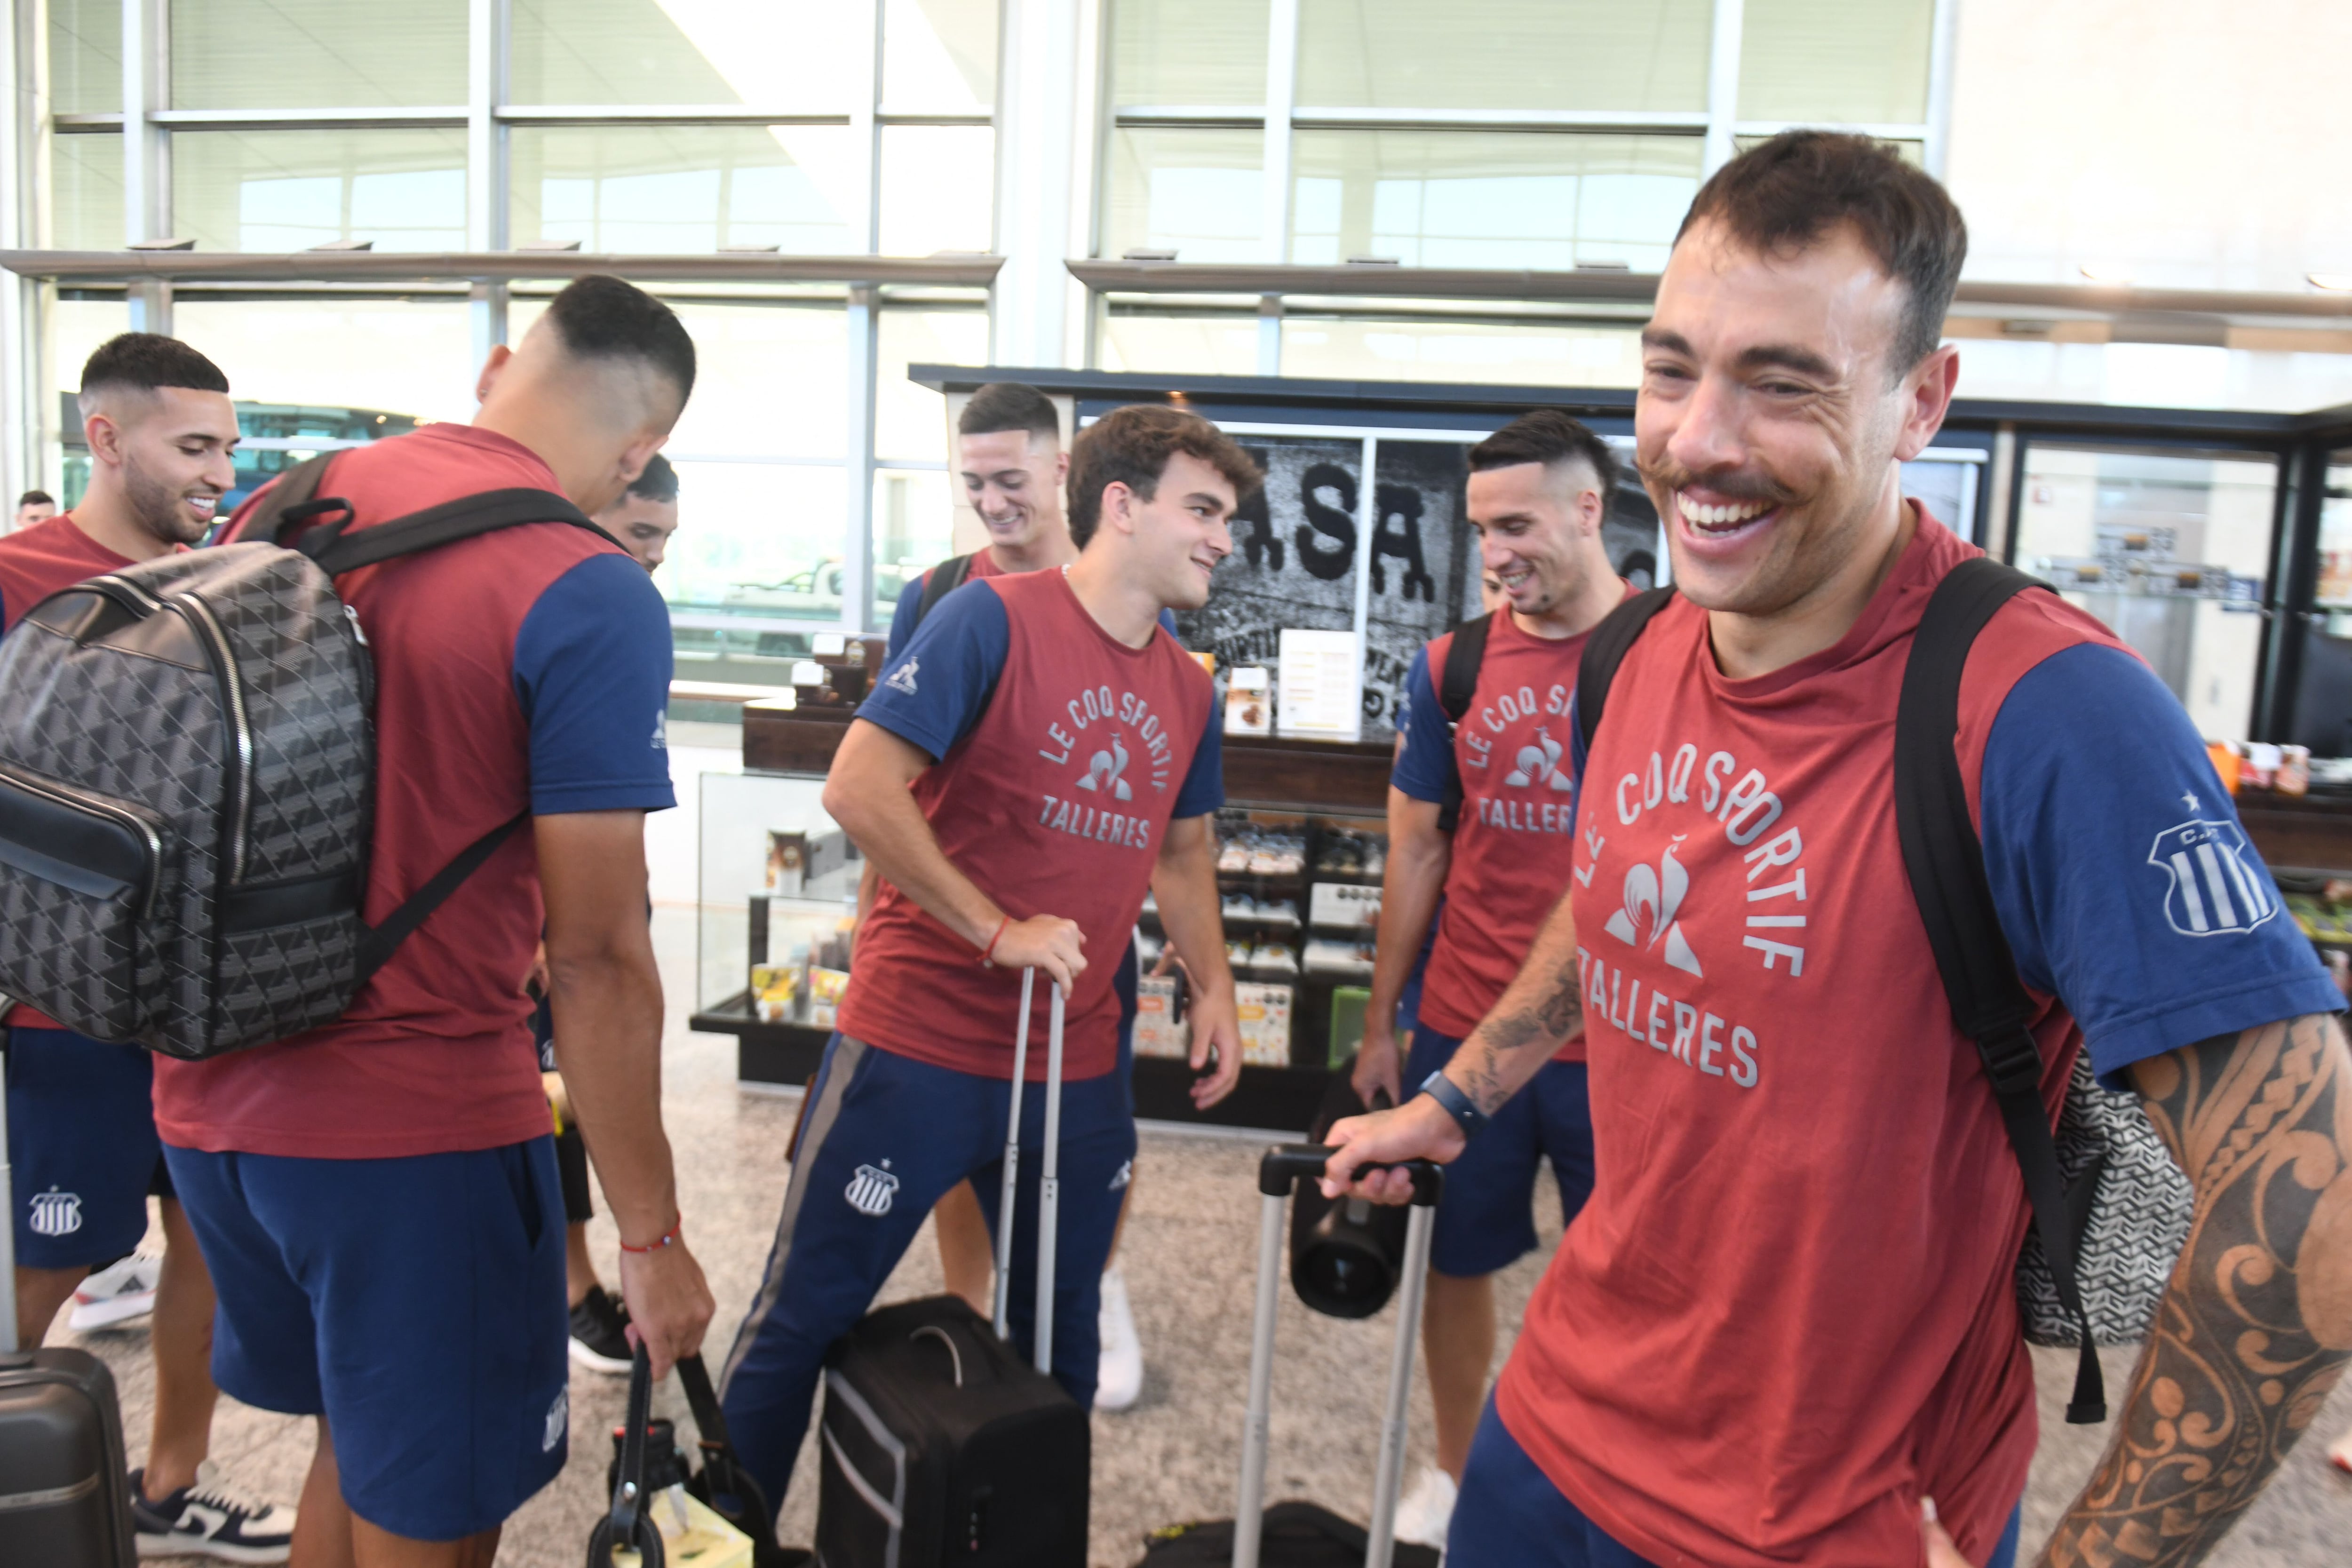 Departure from the Córdoba airport of the players and coaches of Club Atlético Talleres to Ecuador to play in the Copa Libertadores match.